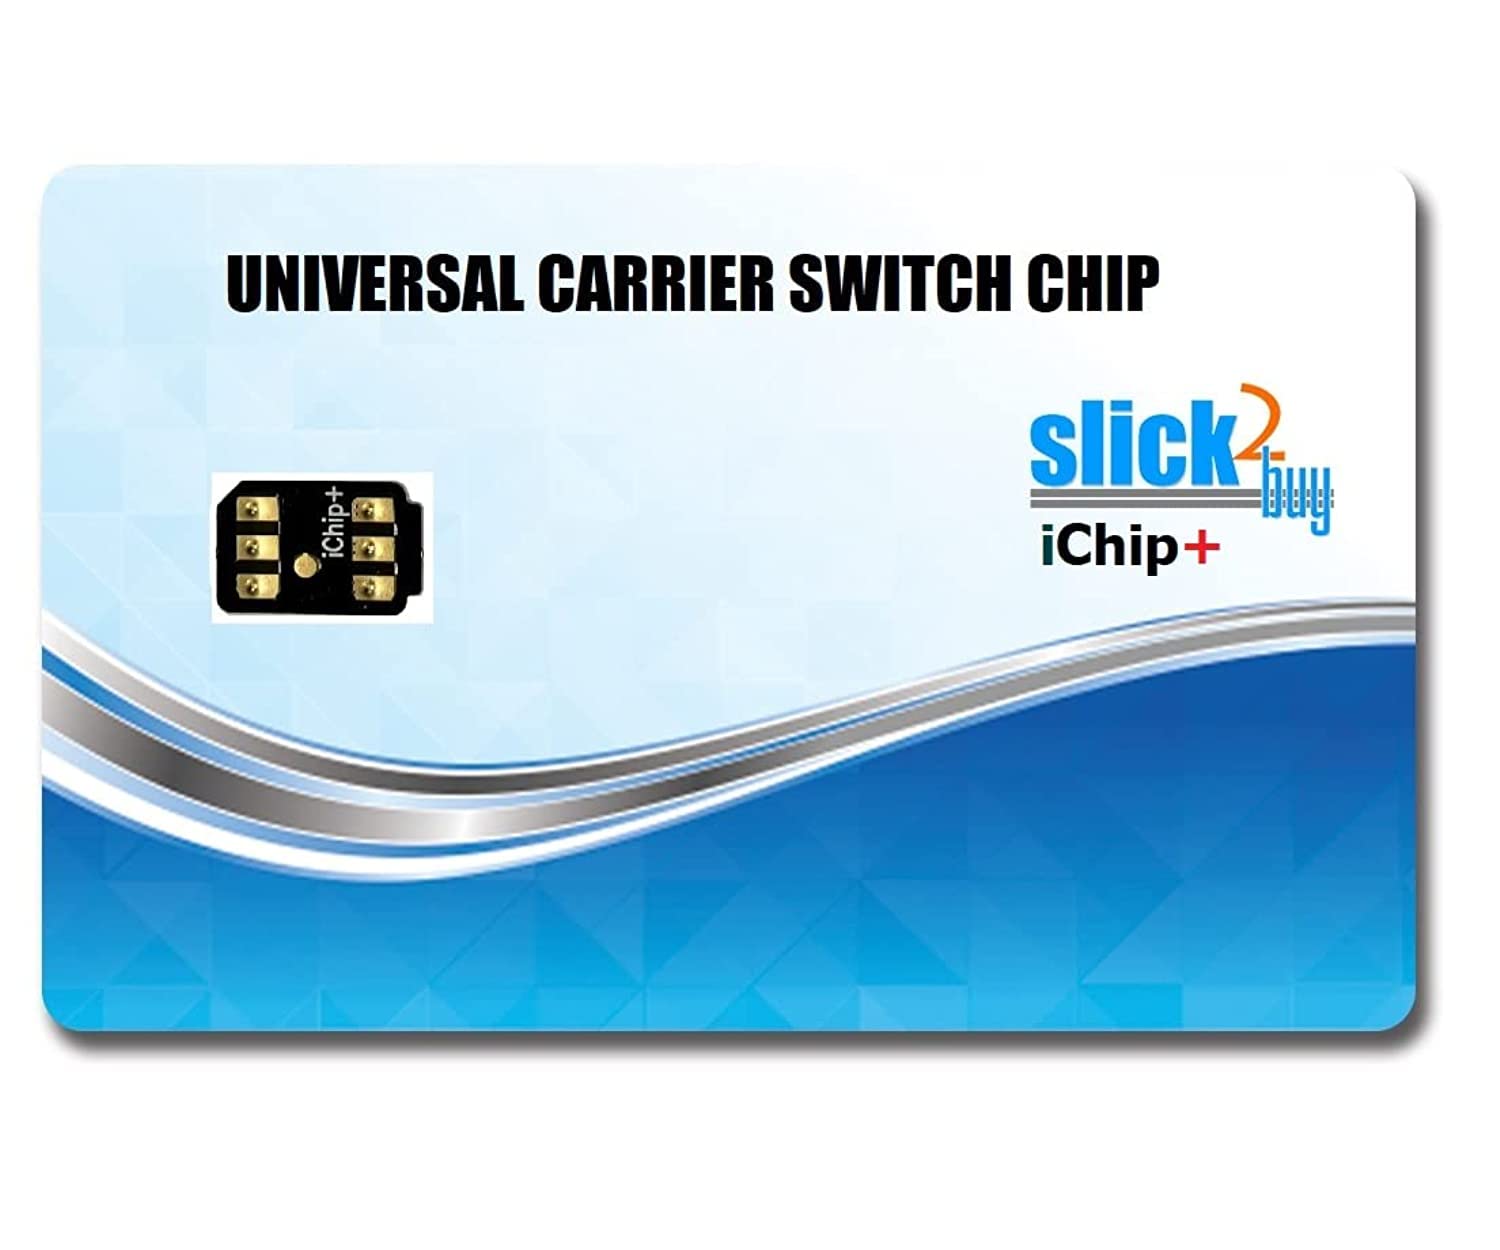 S2B Carrier Switch Adaptor to use Other GSM Cellphone sim Cards